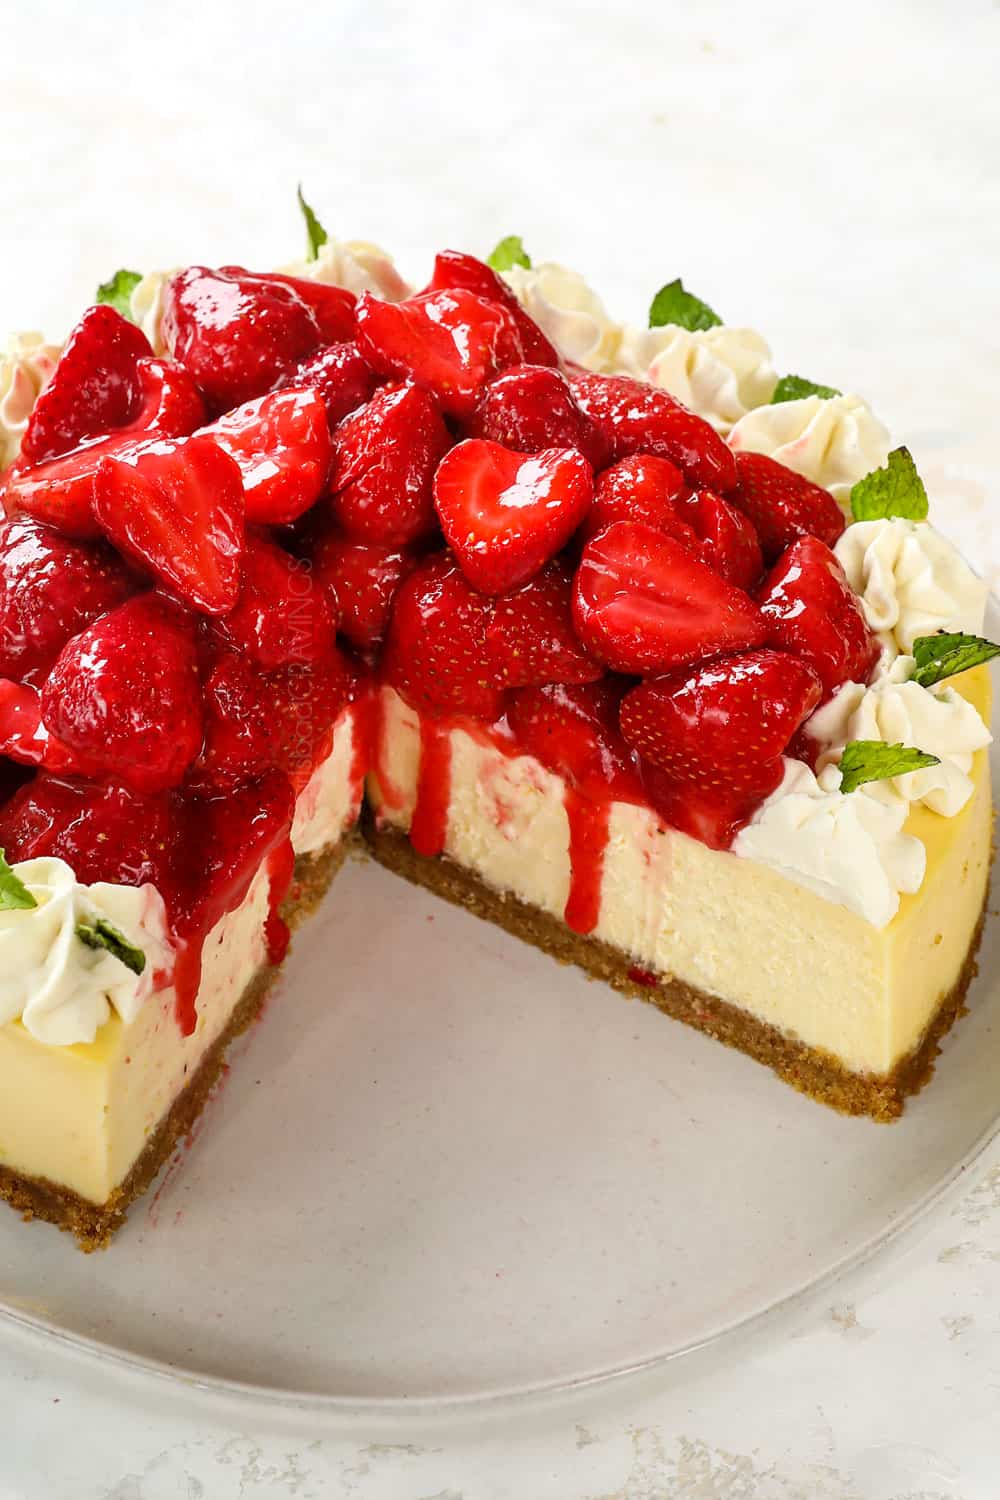 strawberry cheesecake with slices missing showing how creamy it is